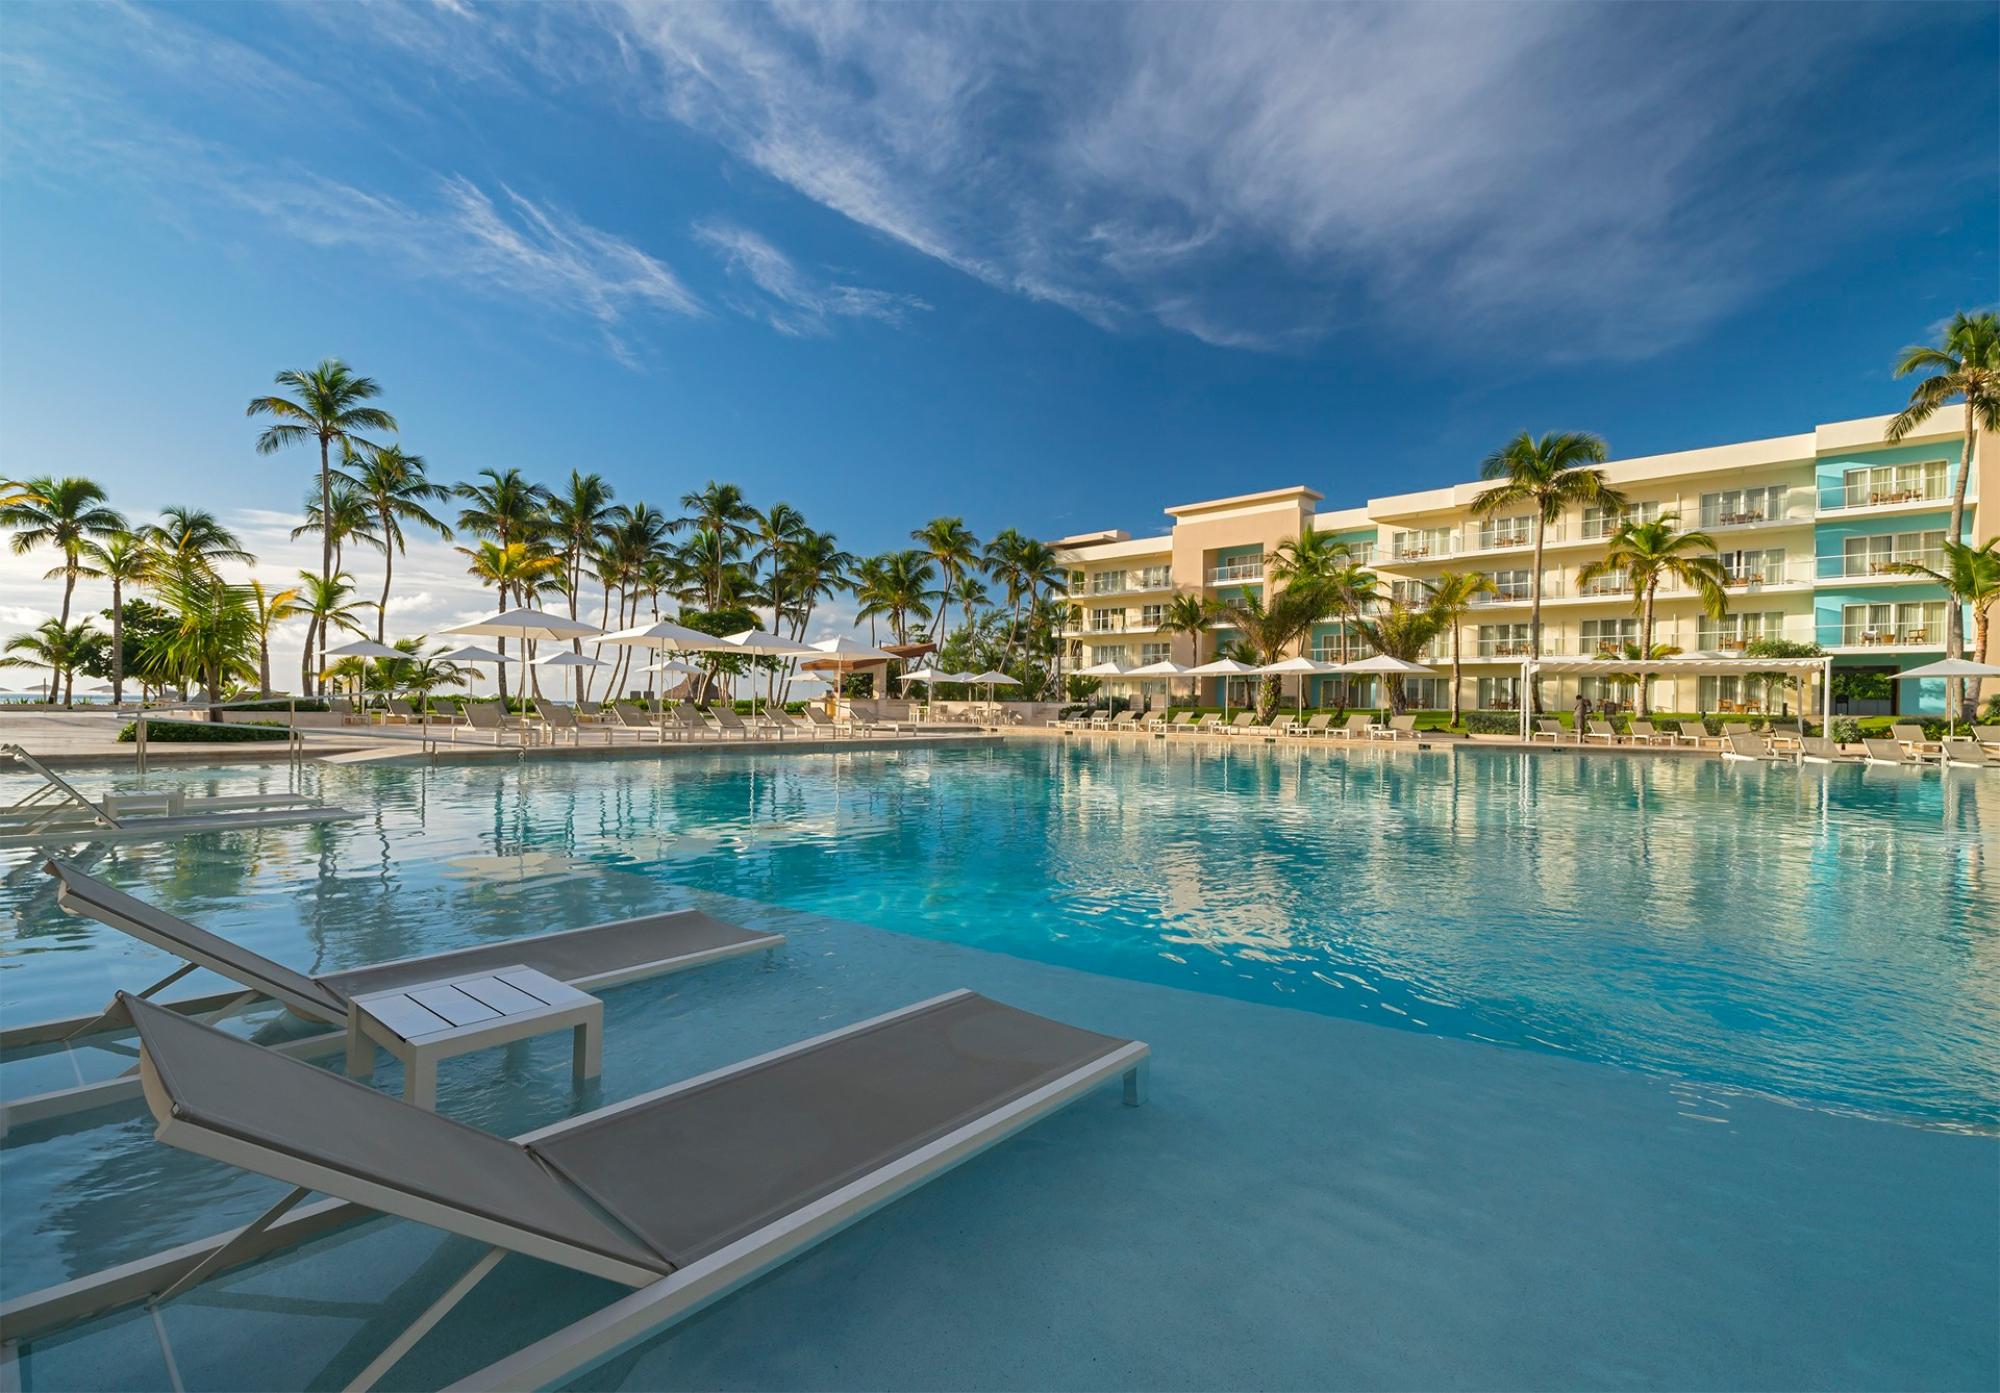 View The Westin Puntacana Resort  Club's lovely main pool in magnificent Dominican Republic.